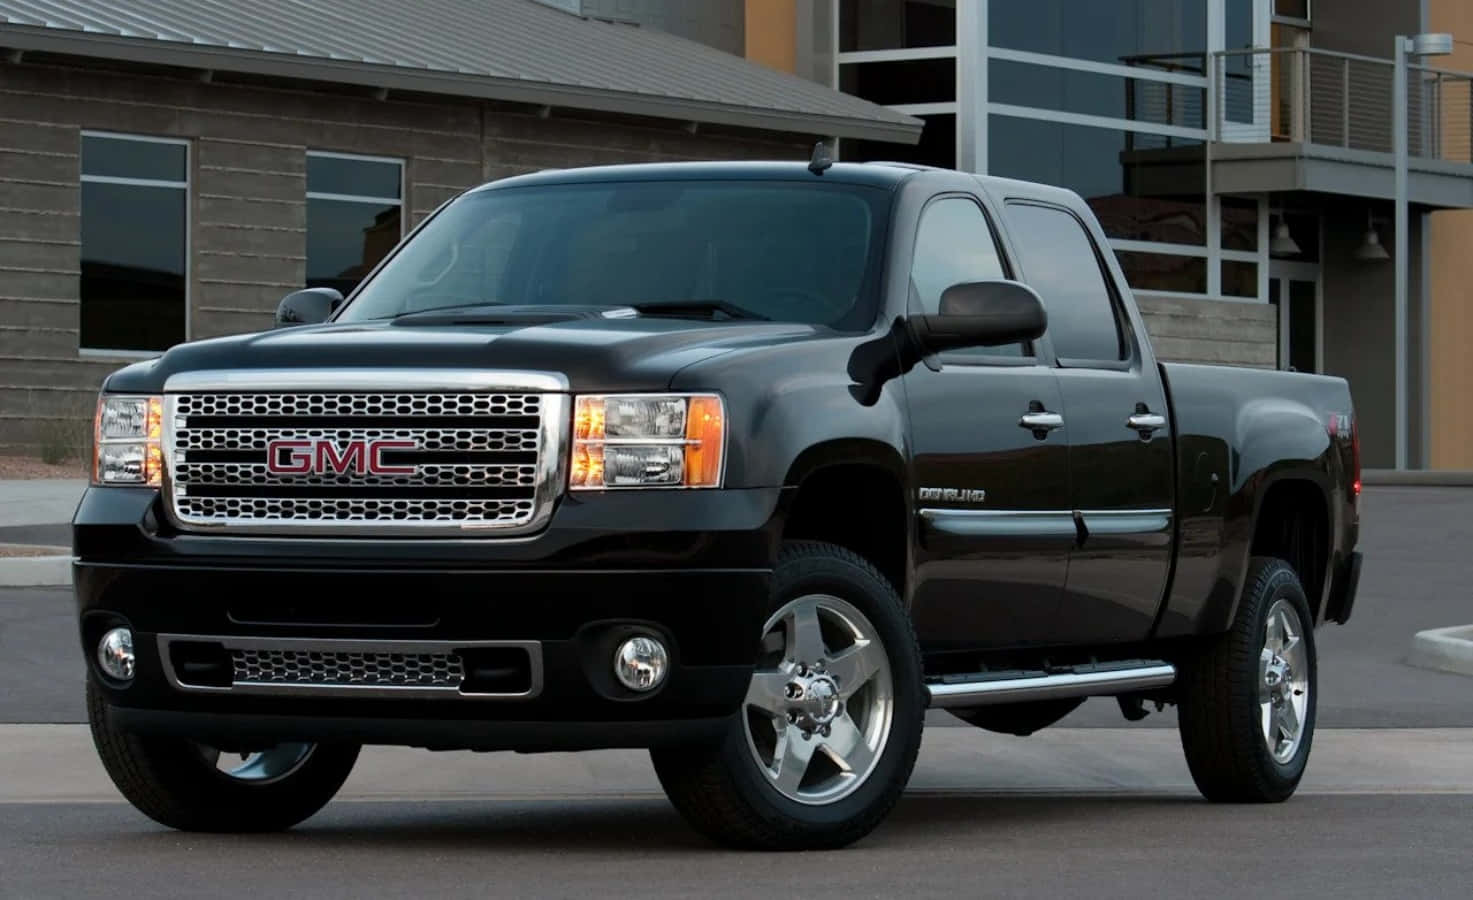 Experience the power and style of GMC